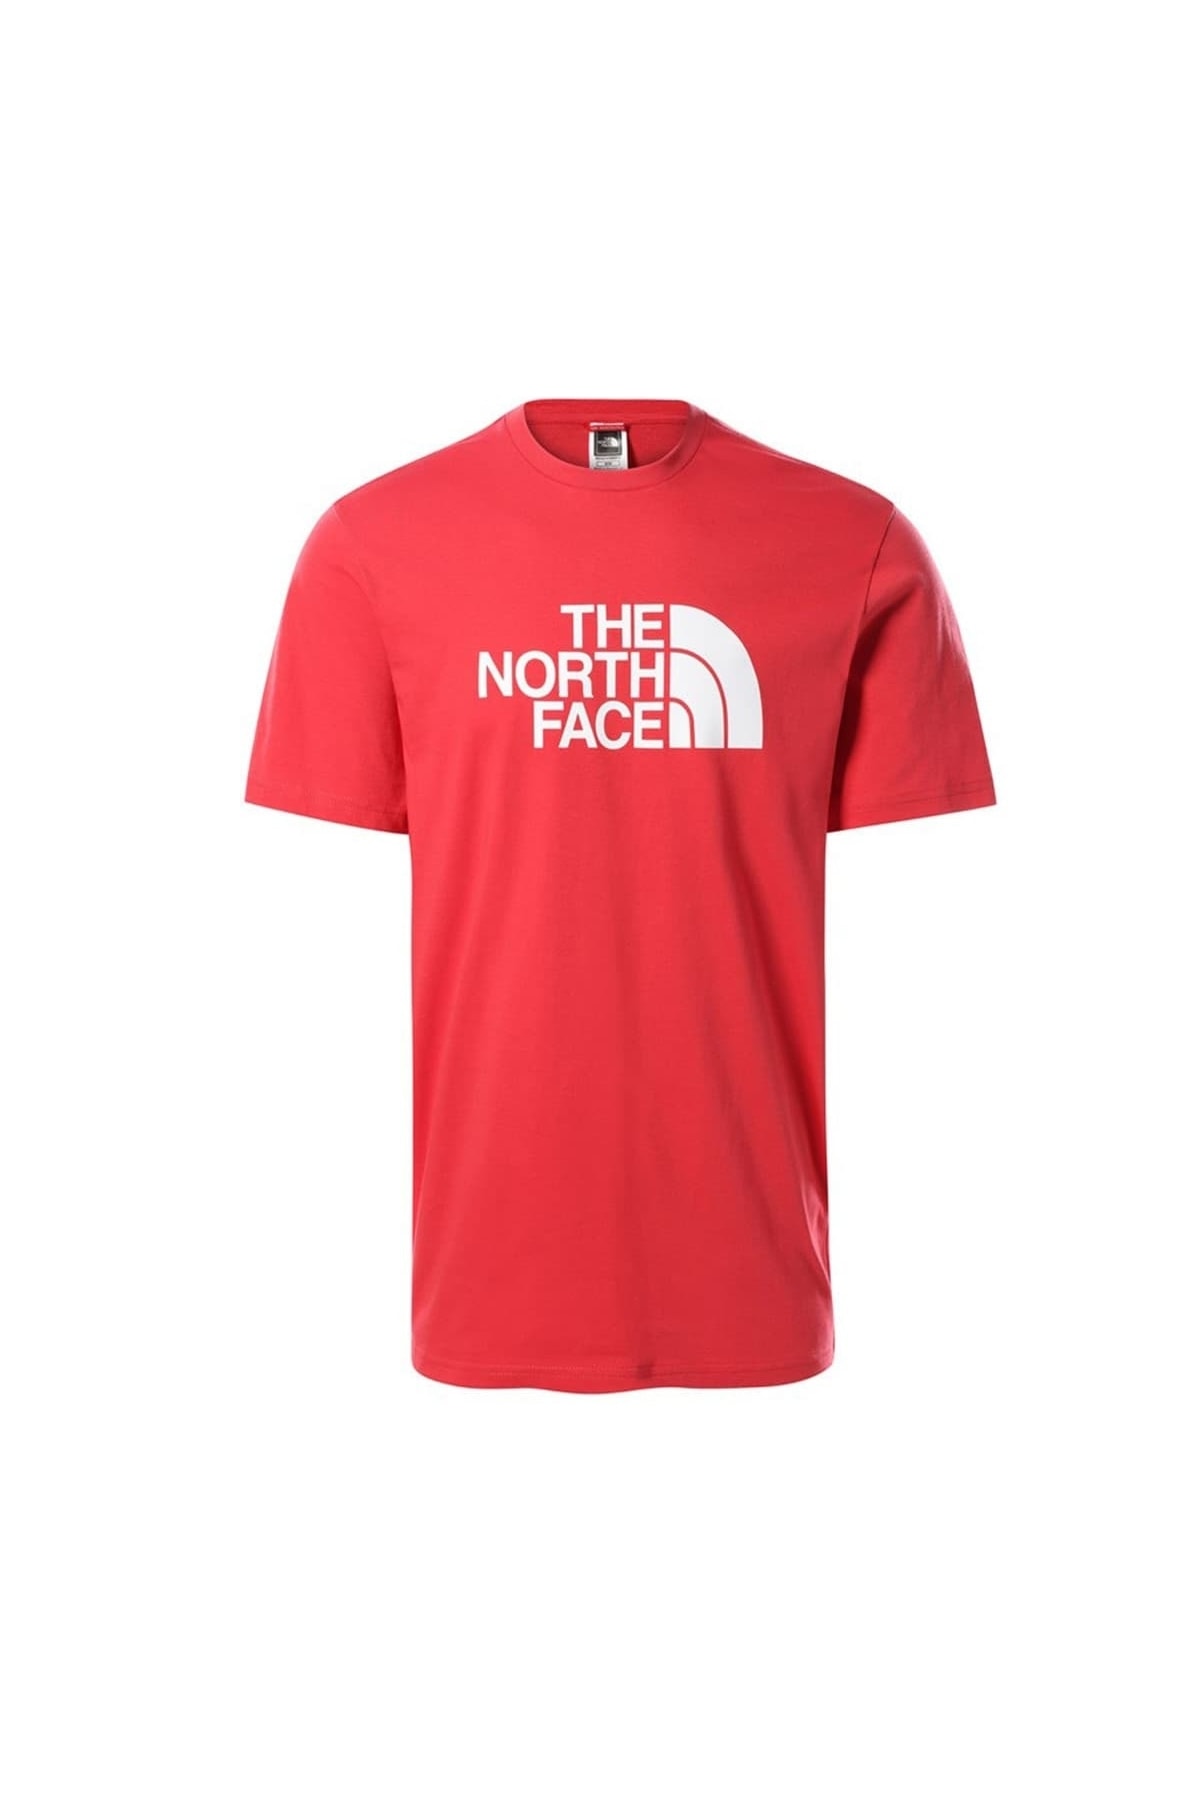 THE NORTH FACE M L/s Easy Tee - Eu